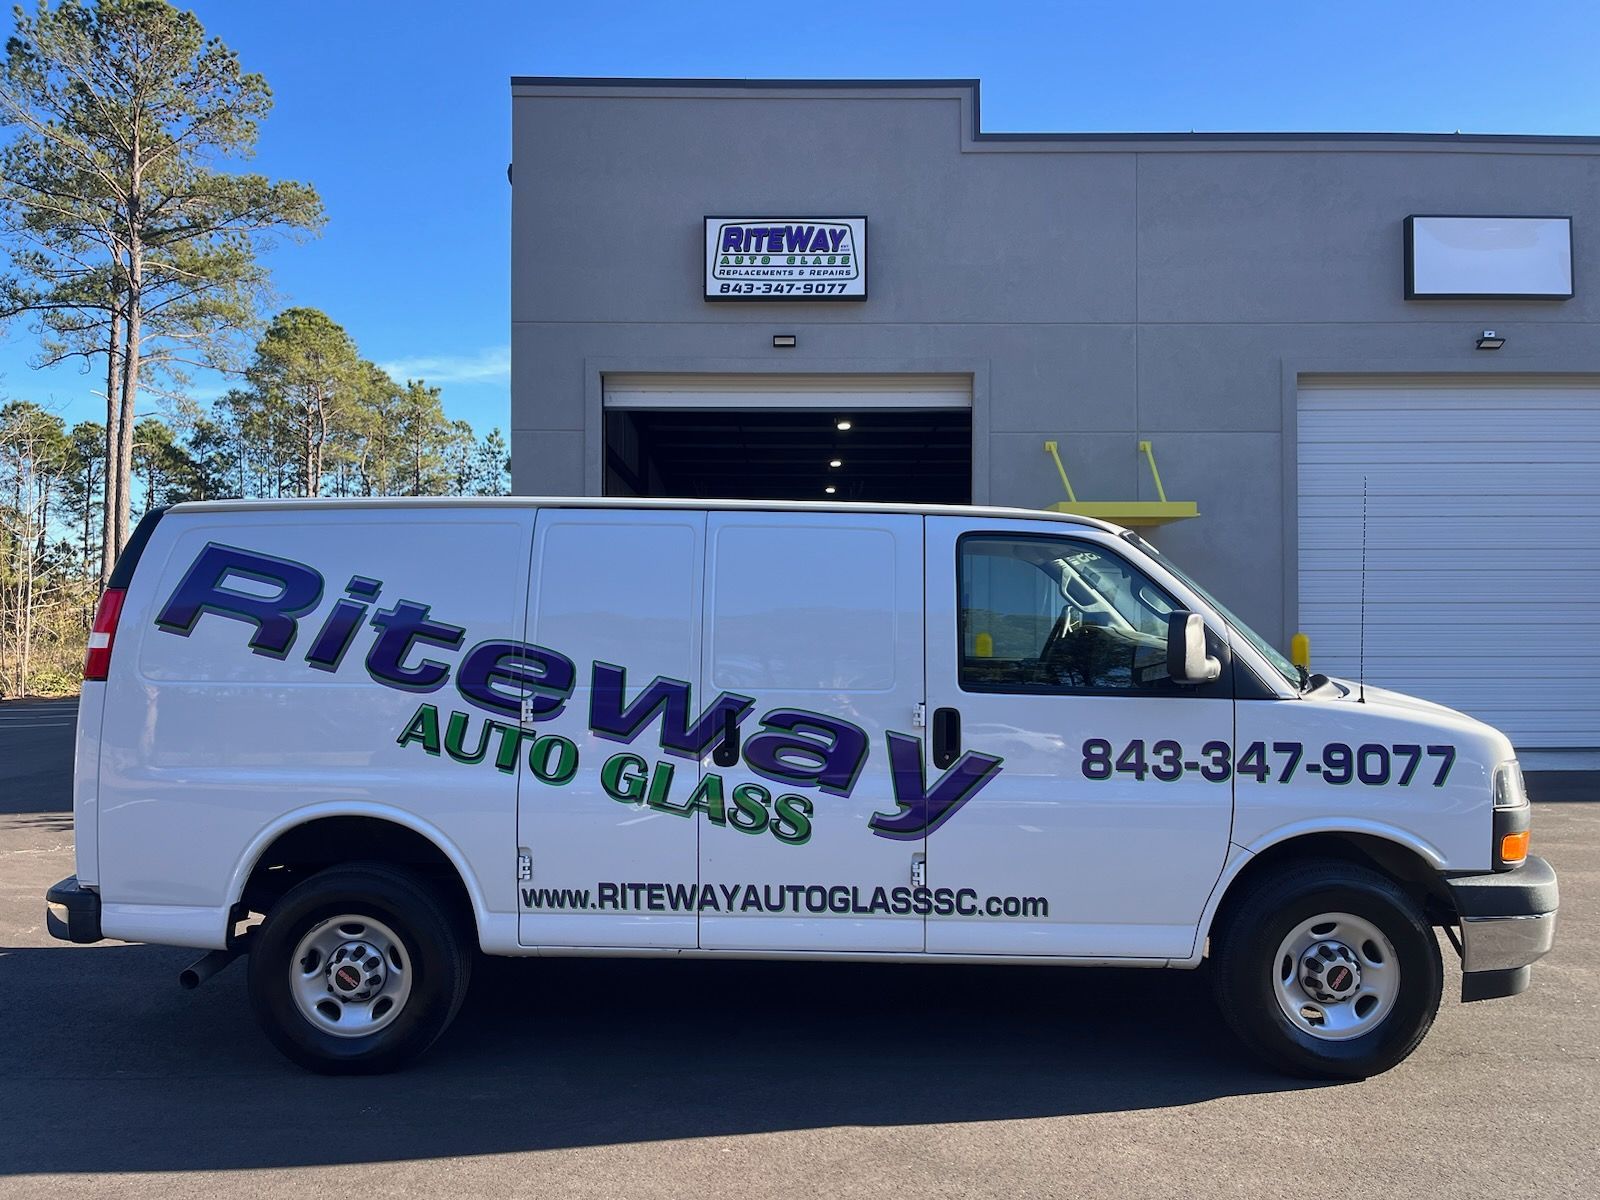 Auto glass insurance claim assistance in Myrtle Beach, NC 